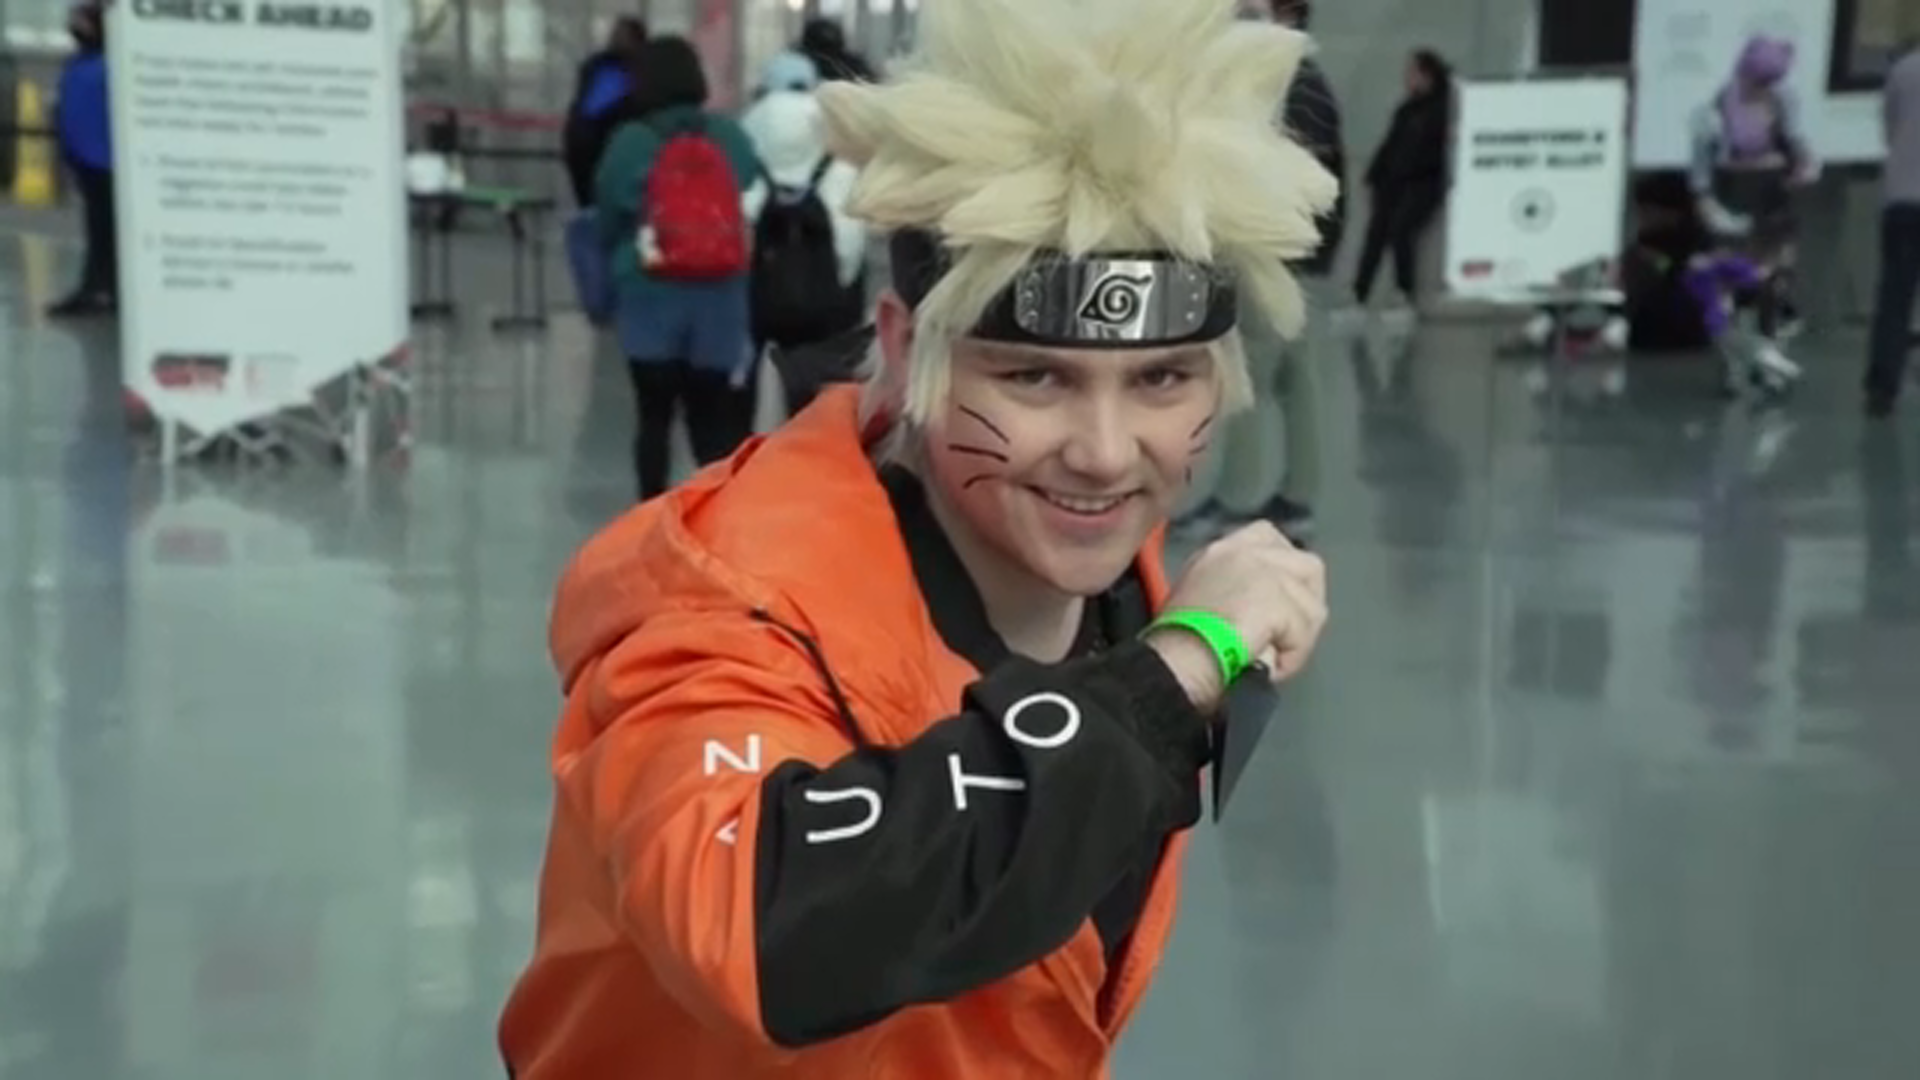 Anime convention held in Lancaster Convention Center